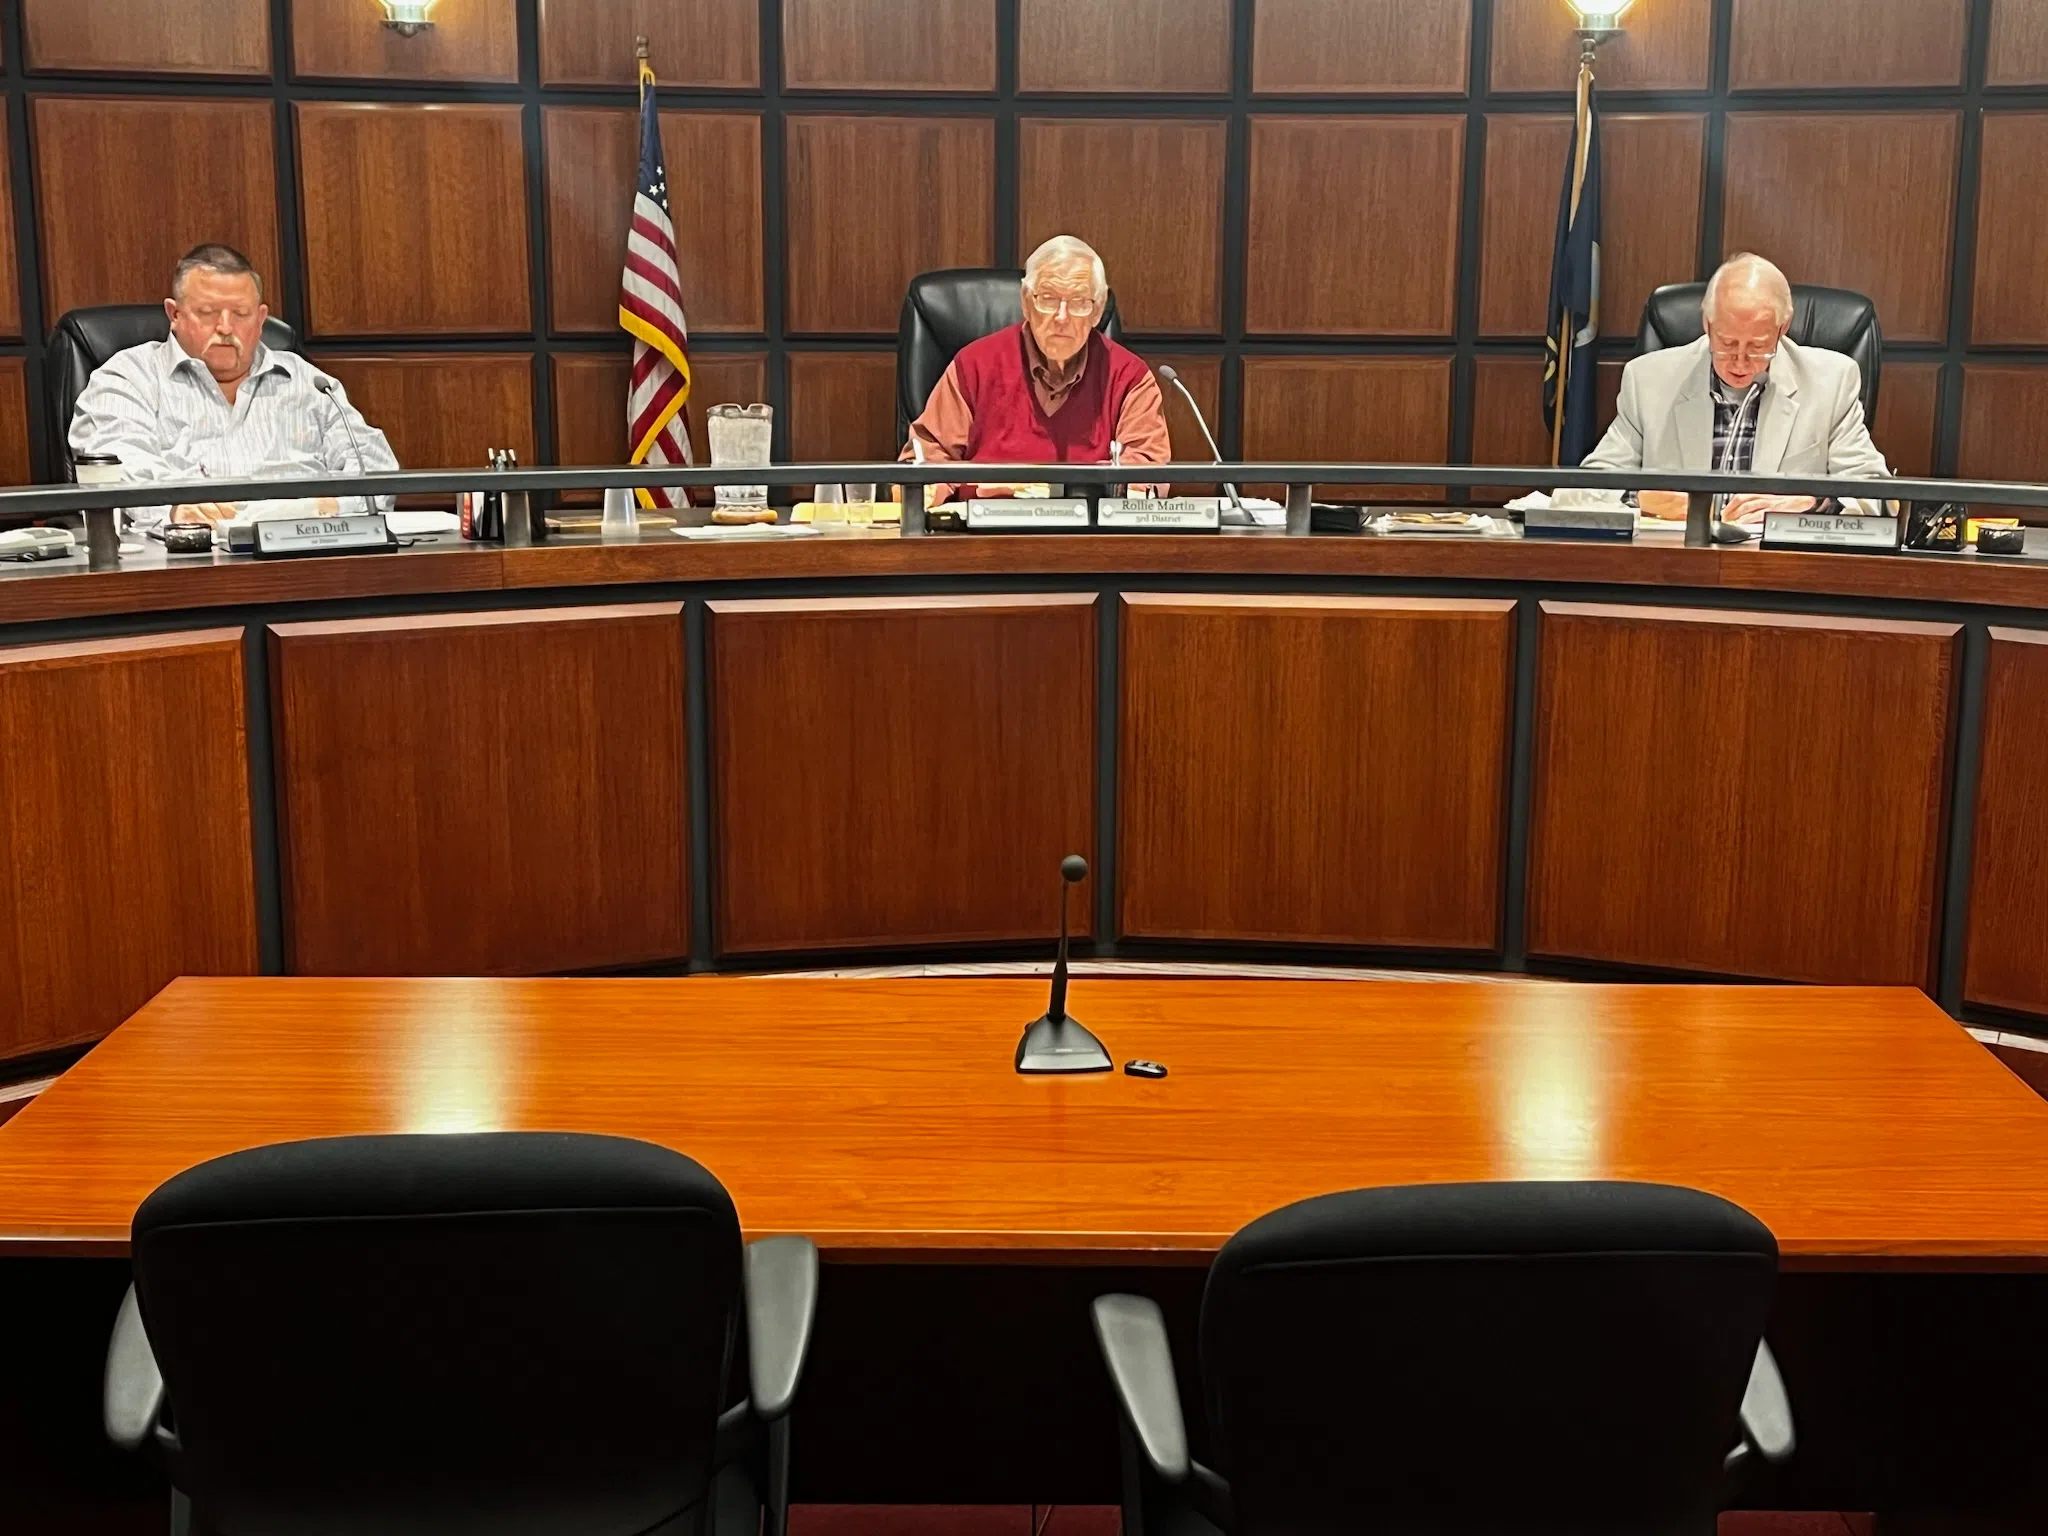 Lyon County Commissioners presented with proposal to alter county billboard regulations as part of weekly action meeting Thursday